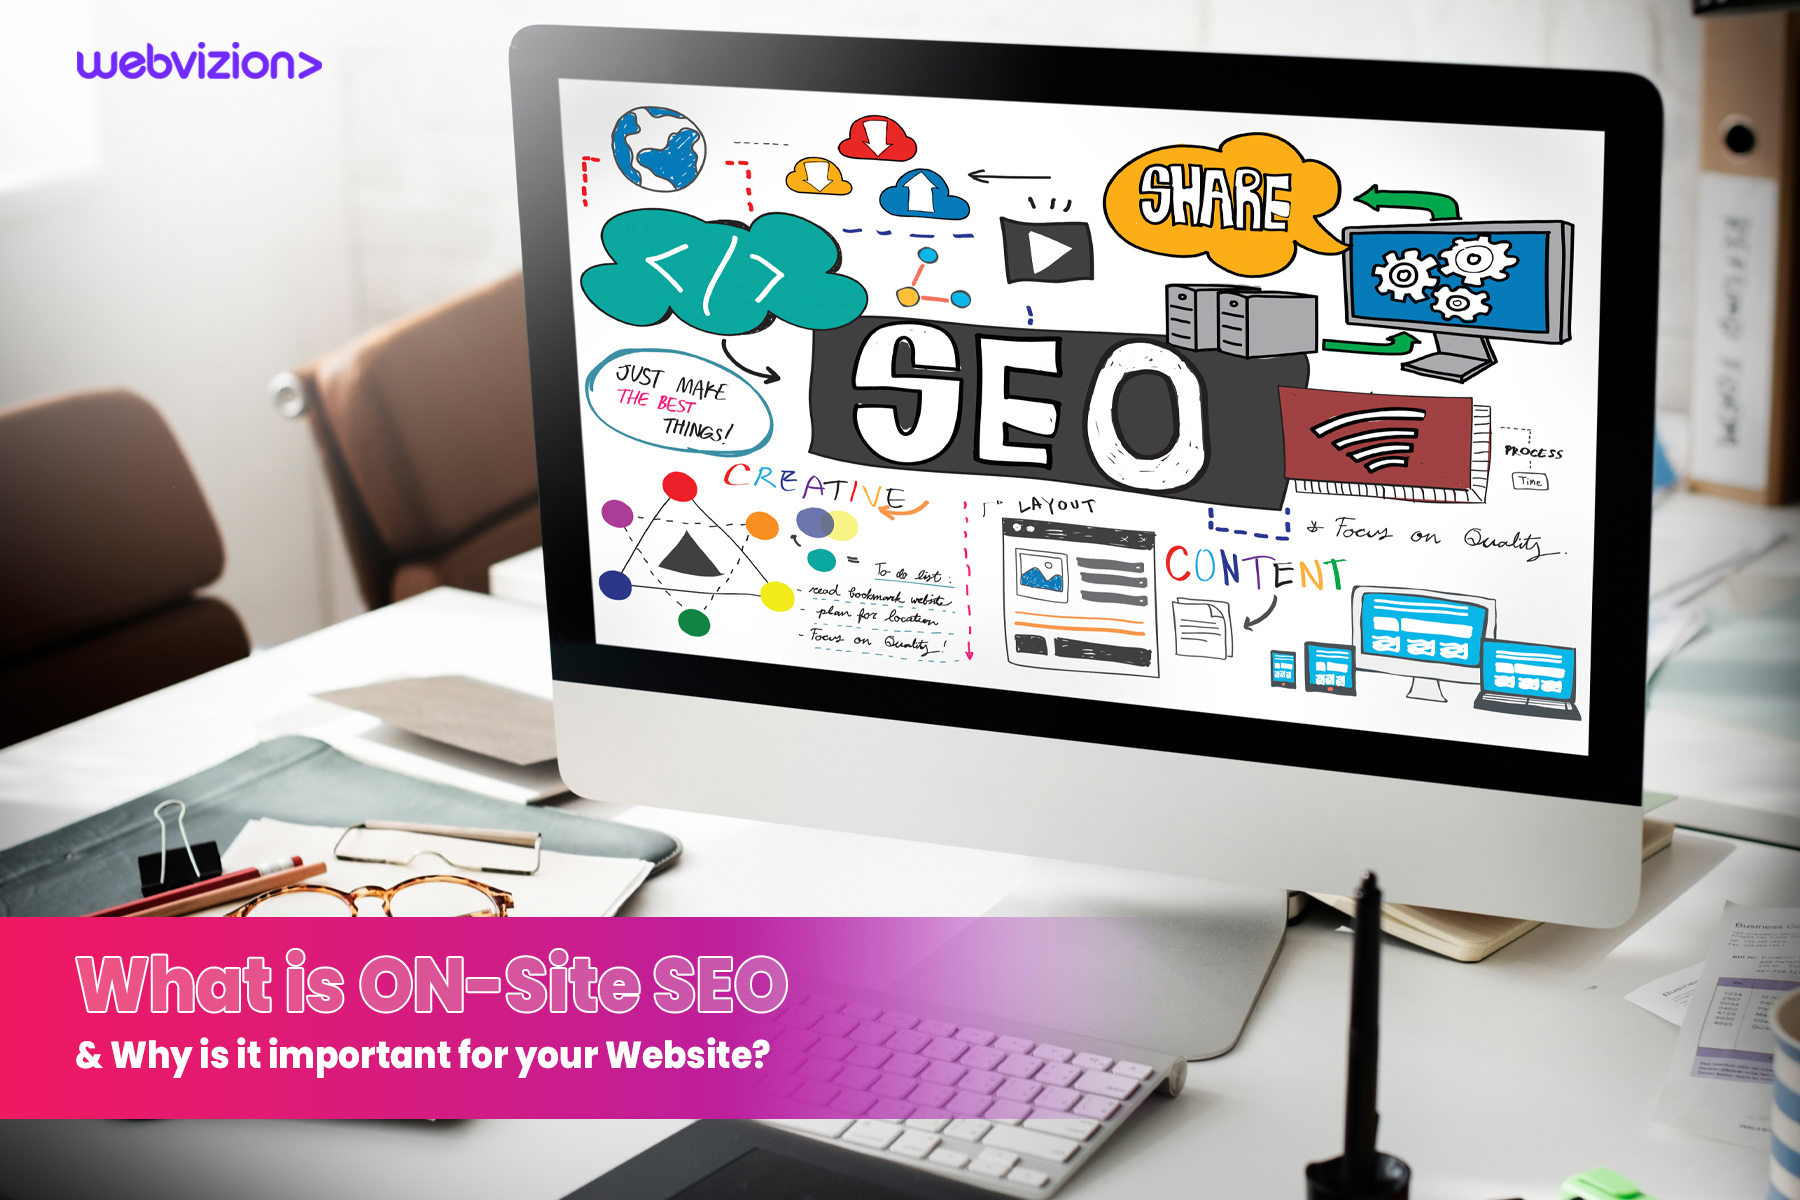 What is ON-Site SEO & Why is it important for your Website